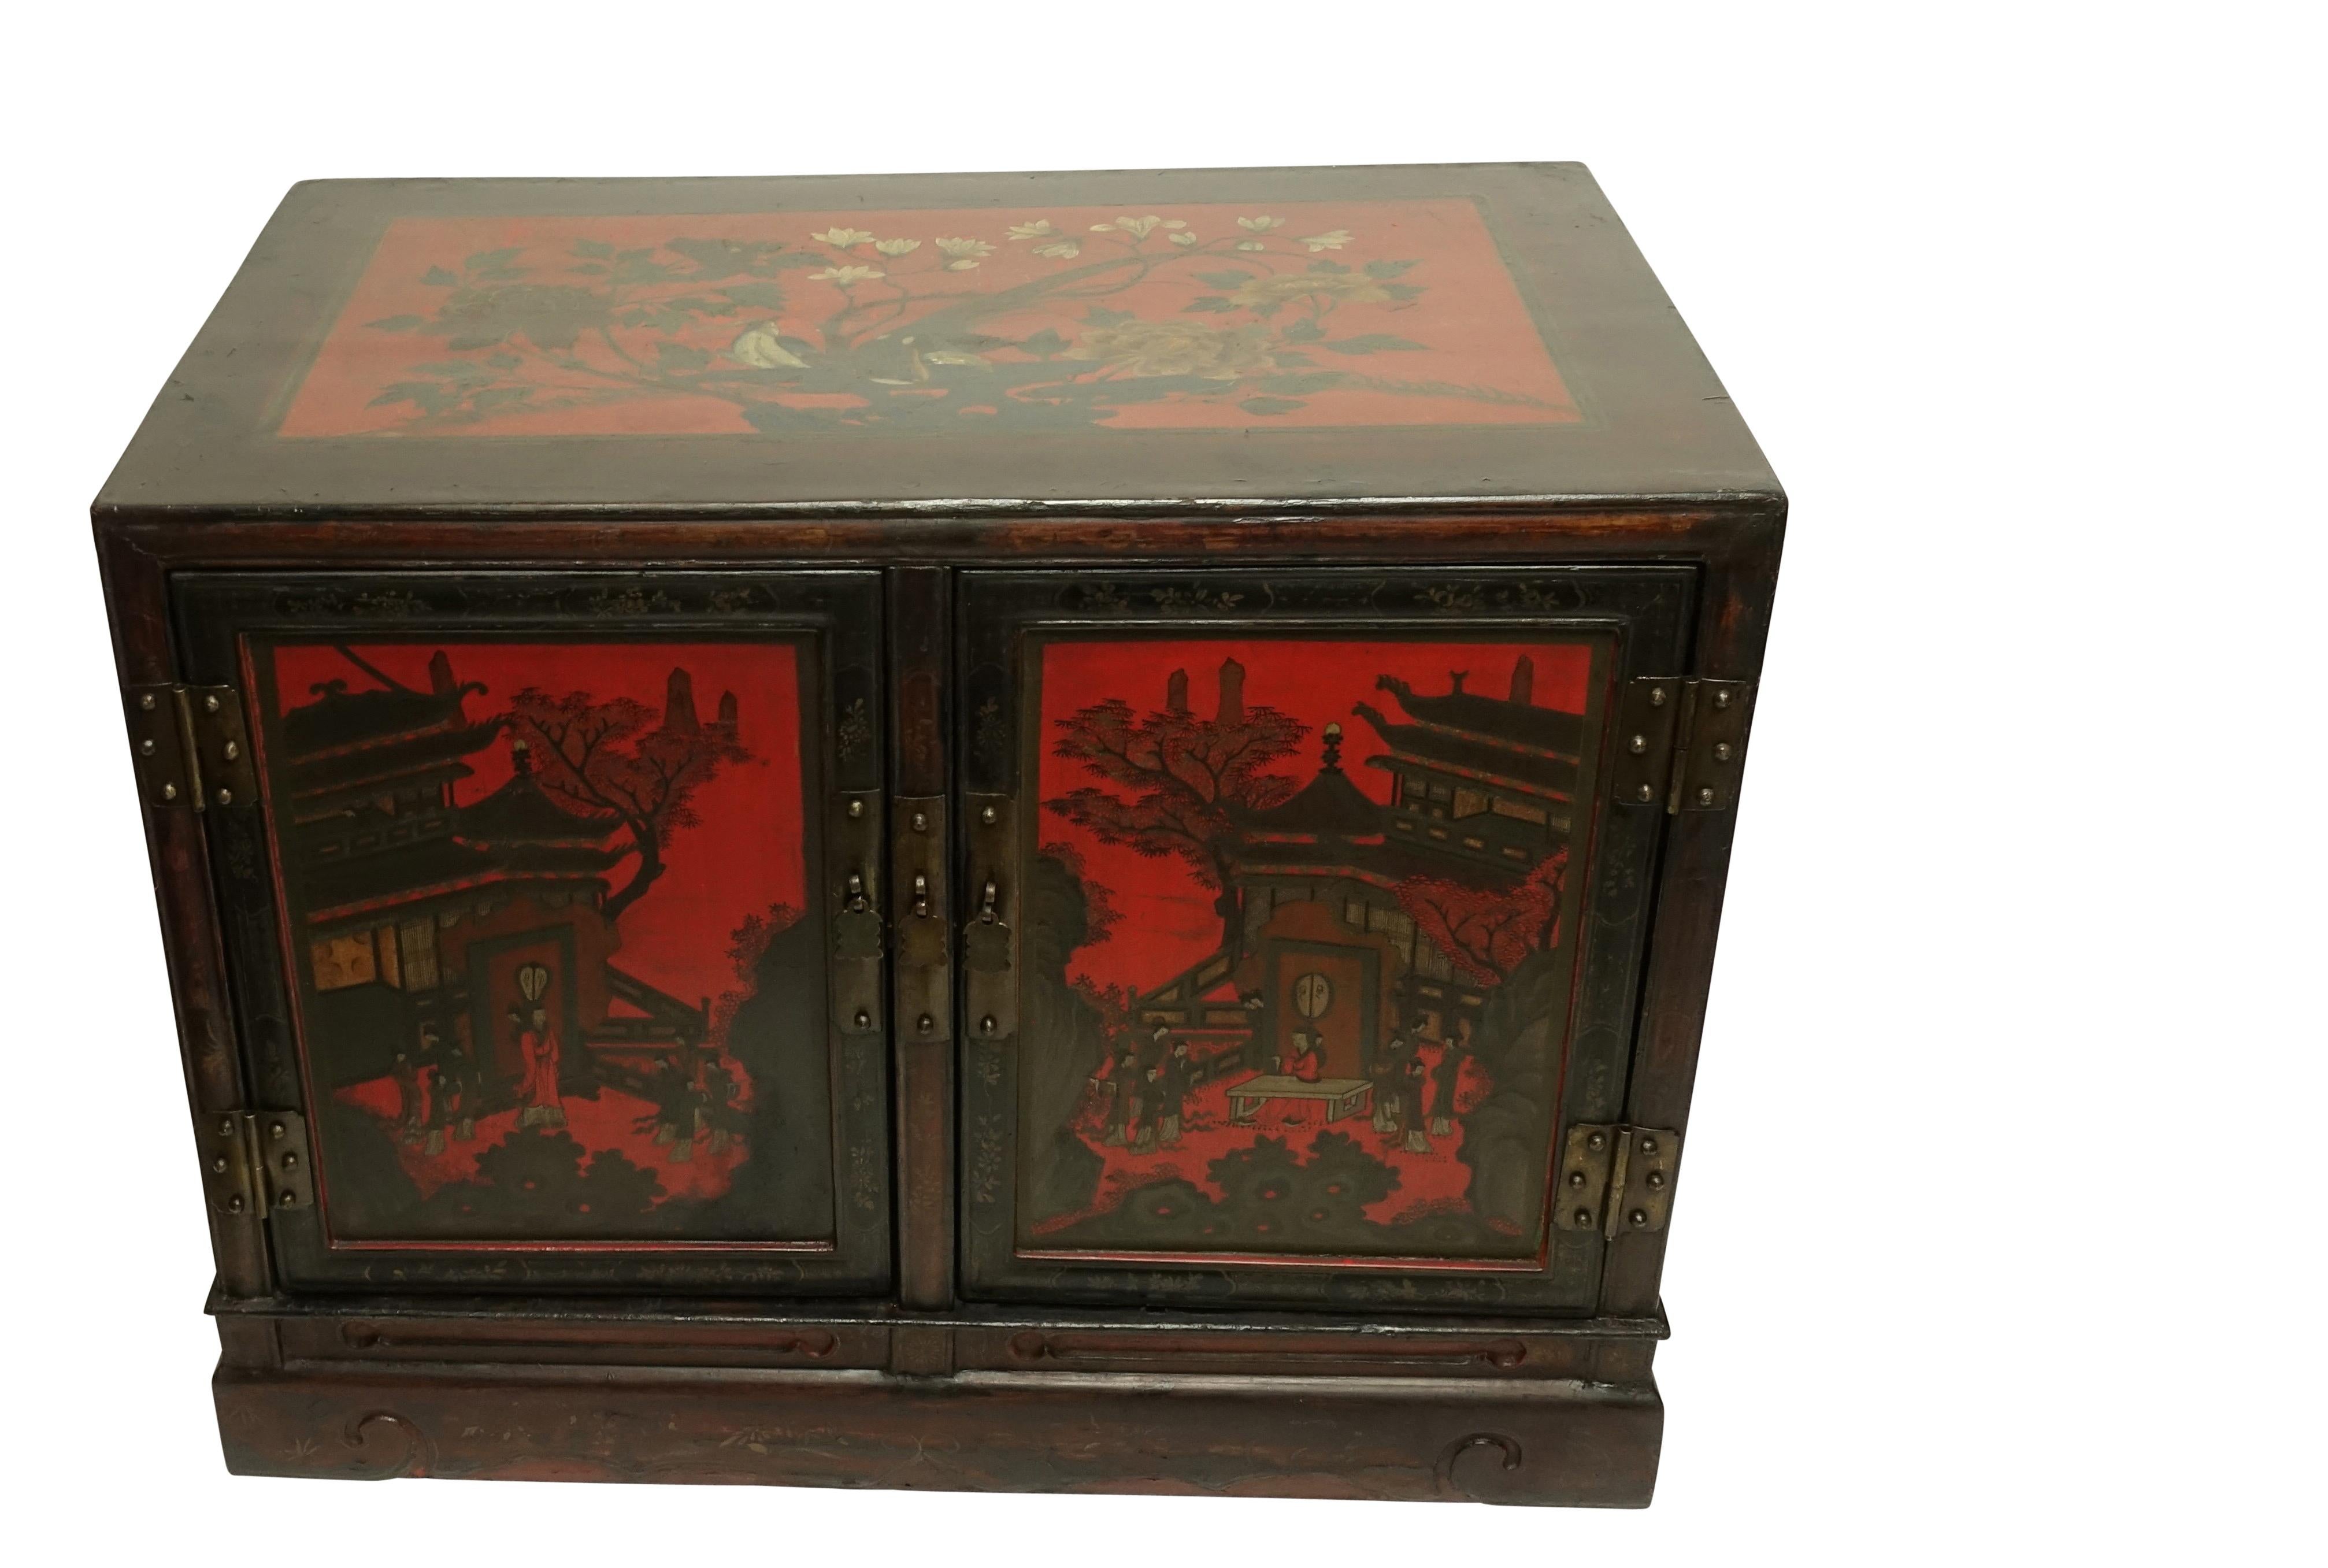 Brass Pair of Chinese Lacquer Robe Cabinets, Qing Dynasty, circa 1840